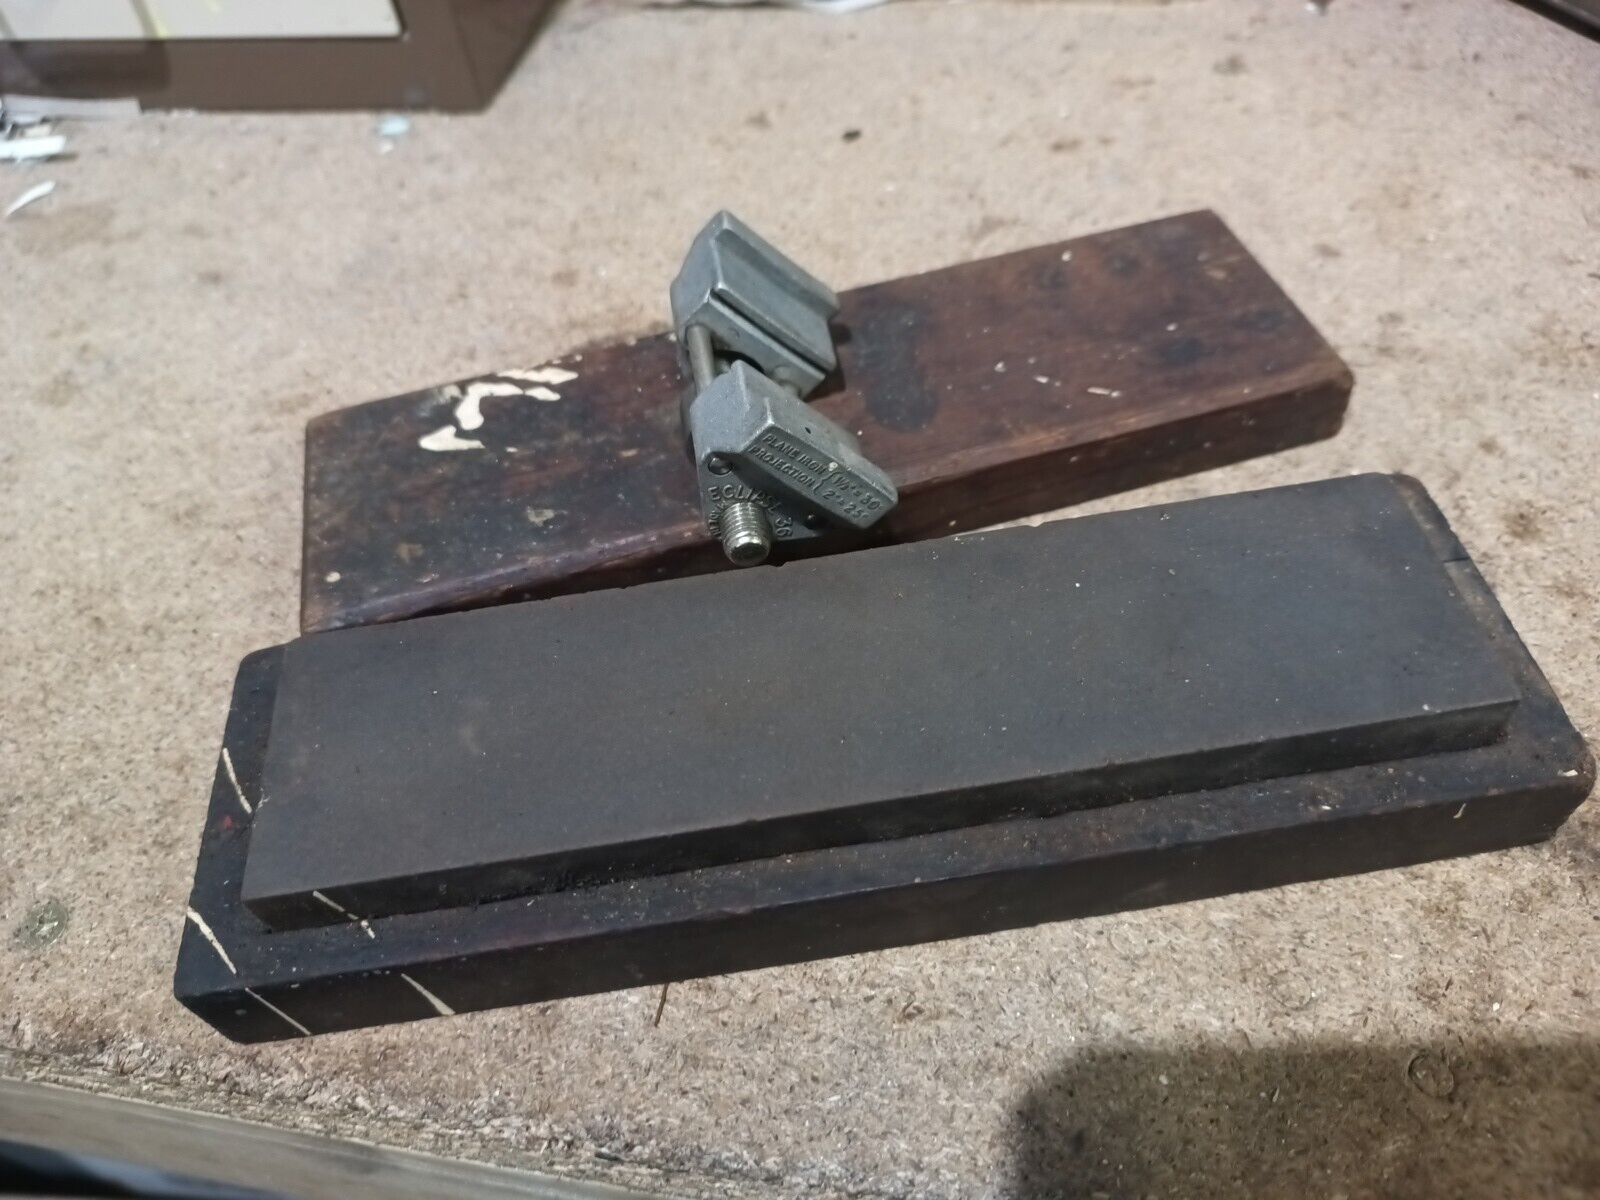 Fine Oilstone And Eclipse No 36 Honing Guide whetstone sharpening stone